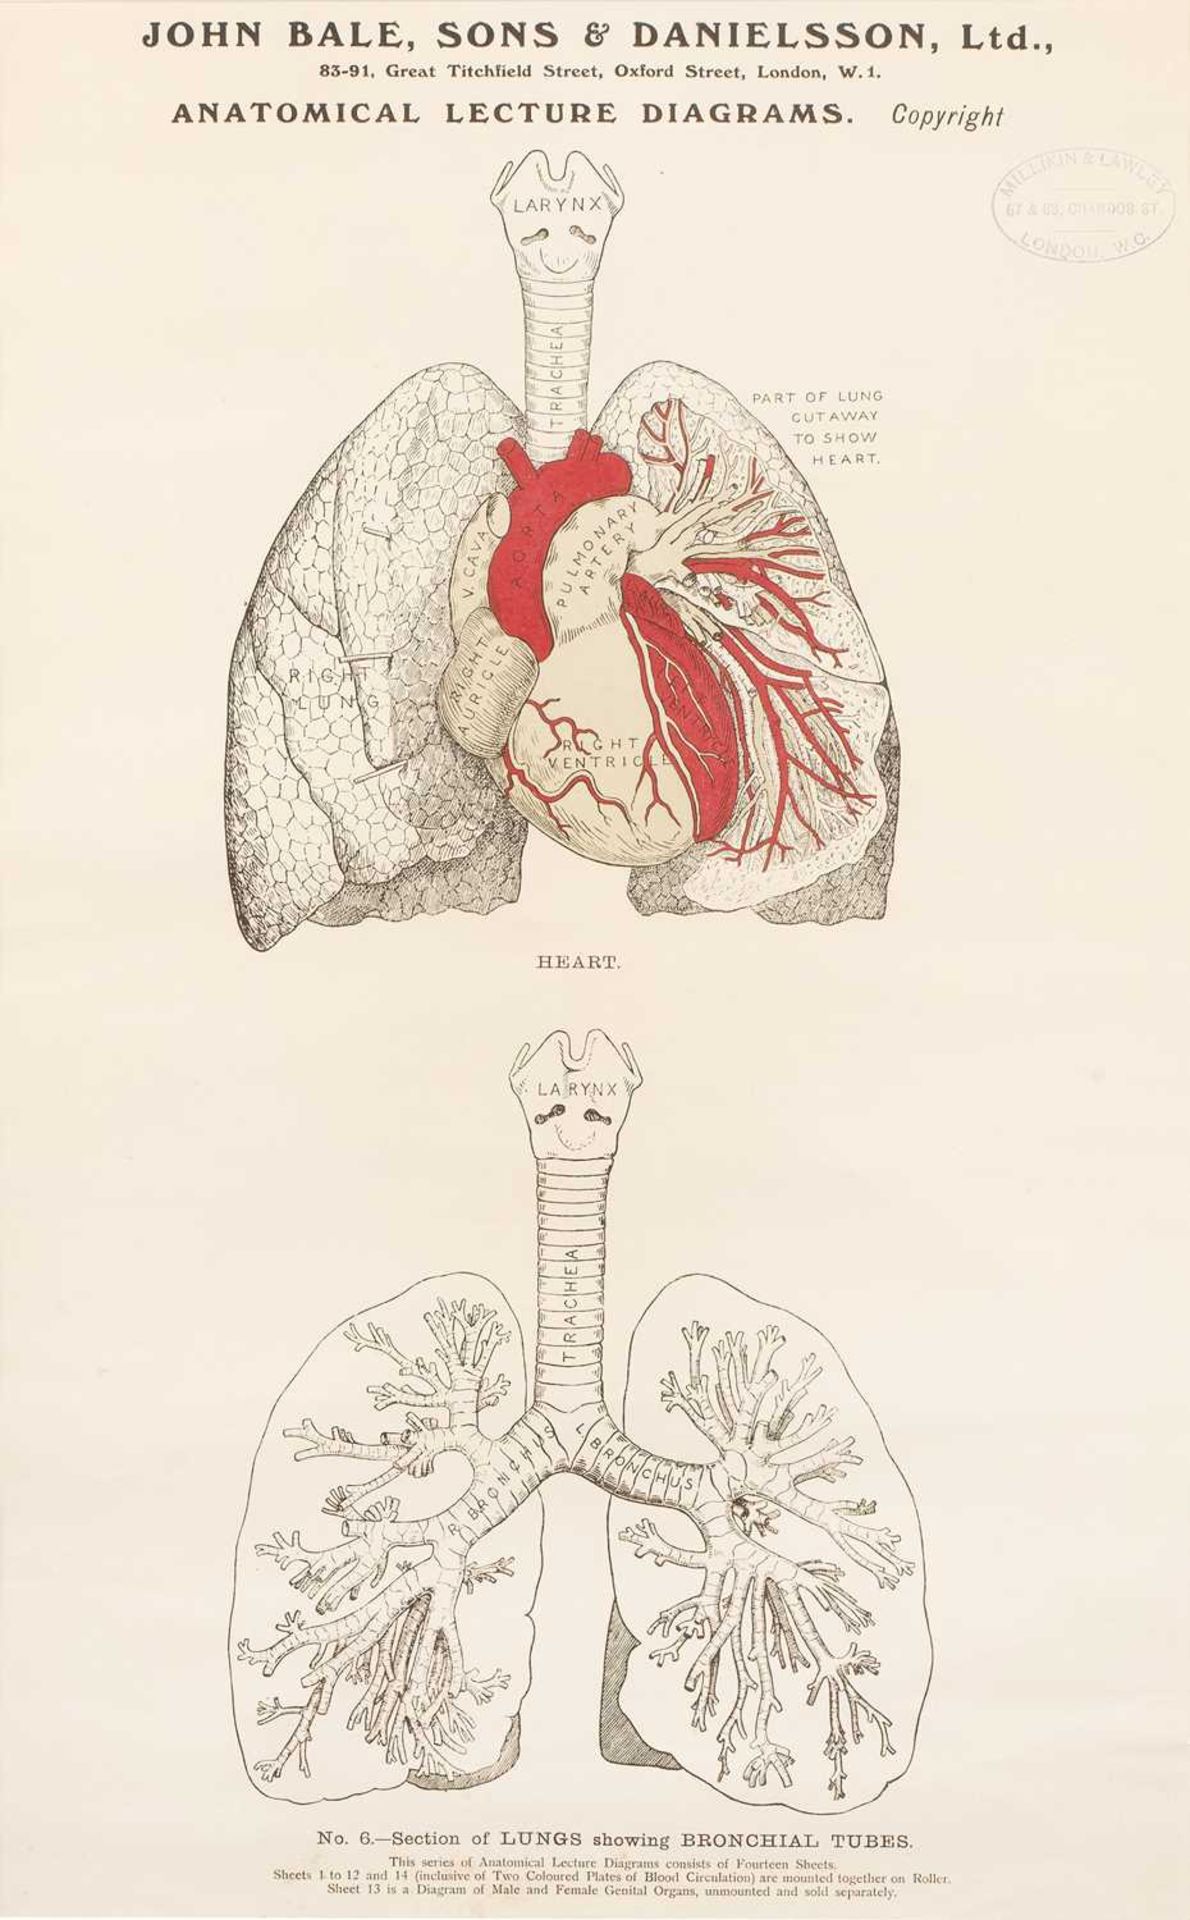 Two John Bale, Sons & Danielsson anatomical lecture diagrams the first labelled No. 5 Human body